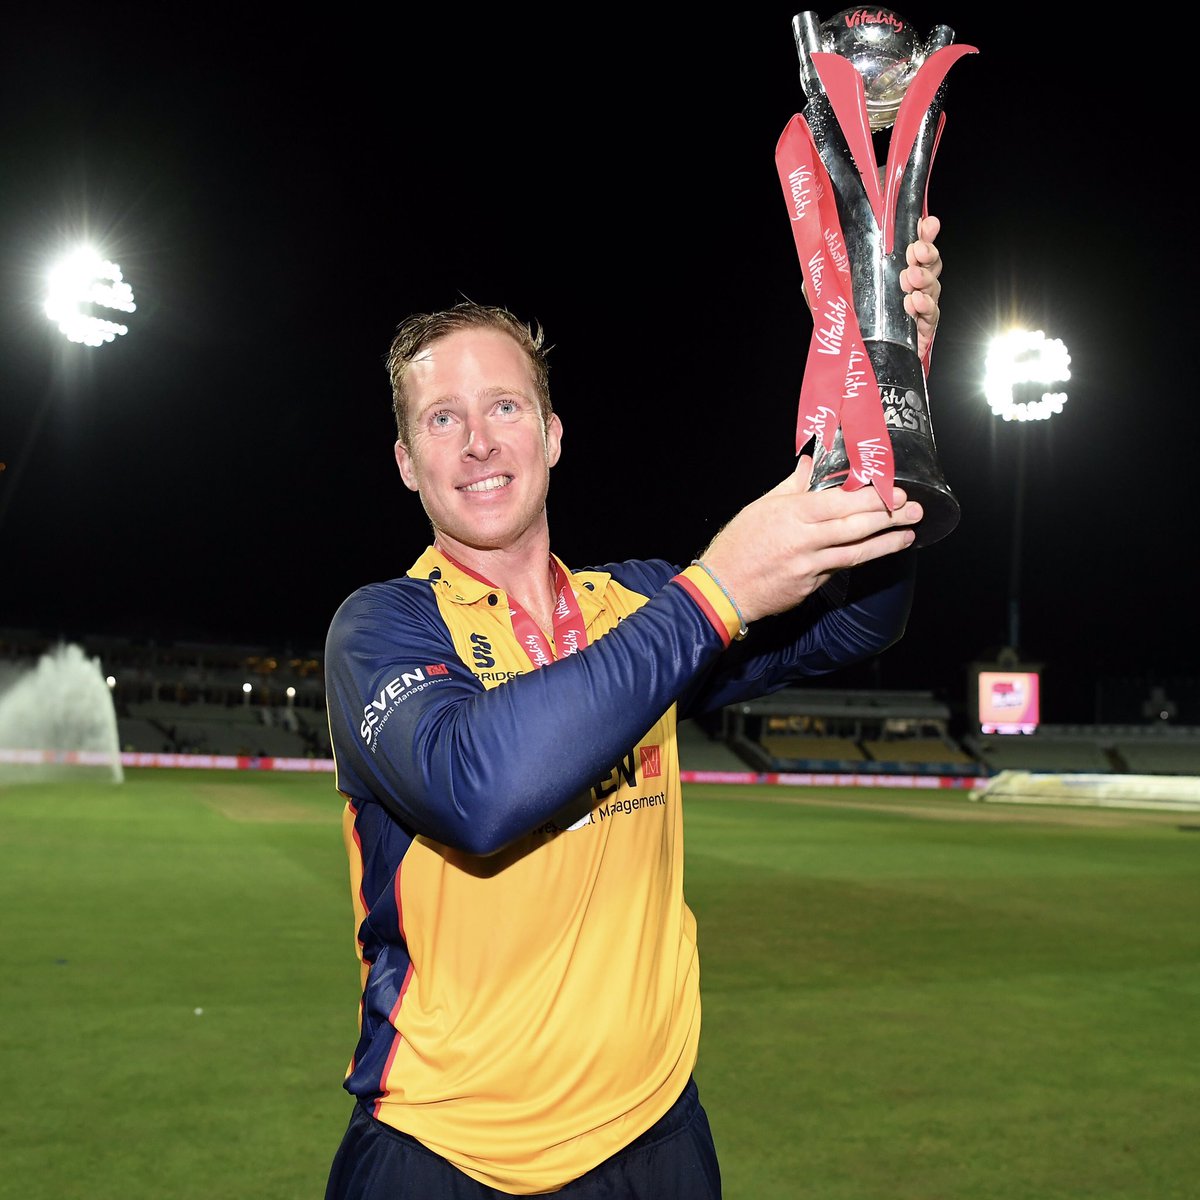 Our brief spell as treble Champions has come to an end... Congratulations go to @TrentBridge on their @VitalityBlast trophy win last night 👏